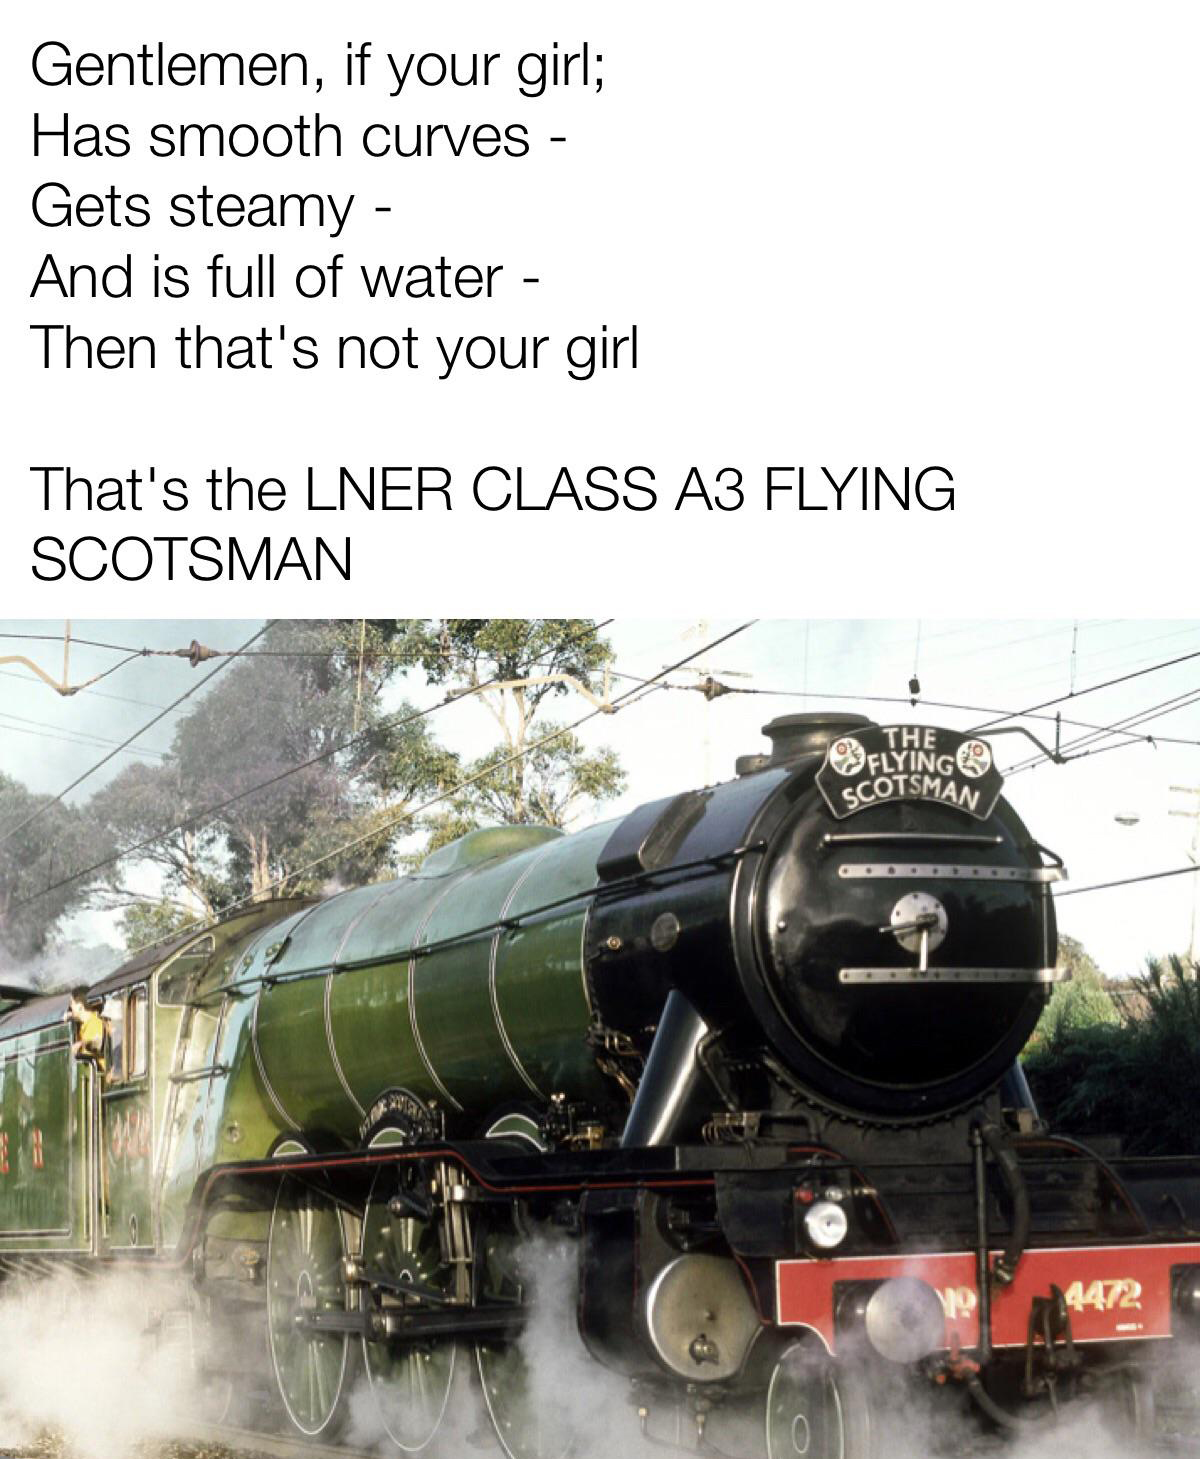 dank memes - flying scotsman - Gentlemen, if your girl; Has smooth curves Gets steamy And is full of water Then that's not your girl That's the Lner Class A3 Flying Scotsman The Flying Scotsman 4472